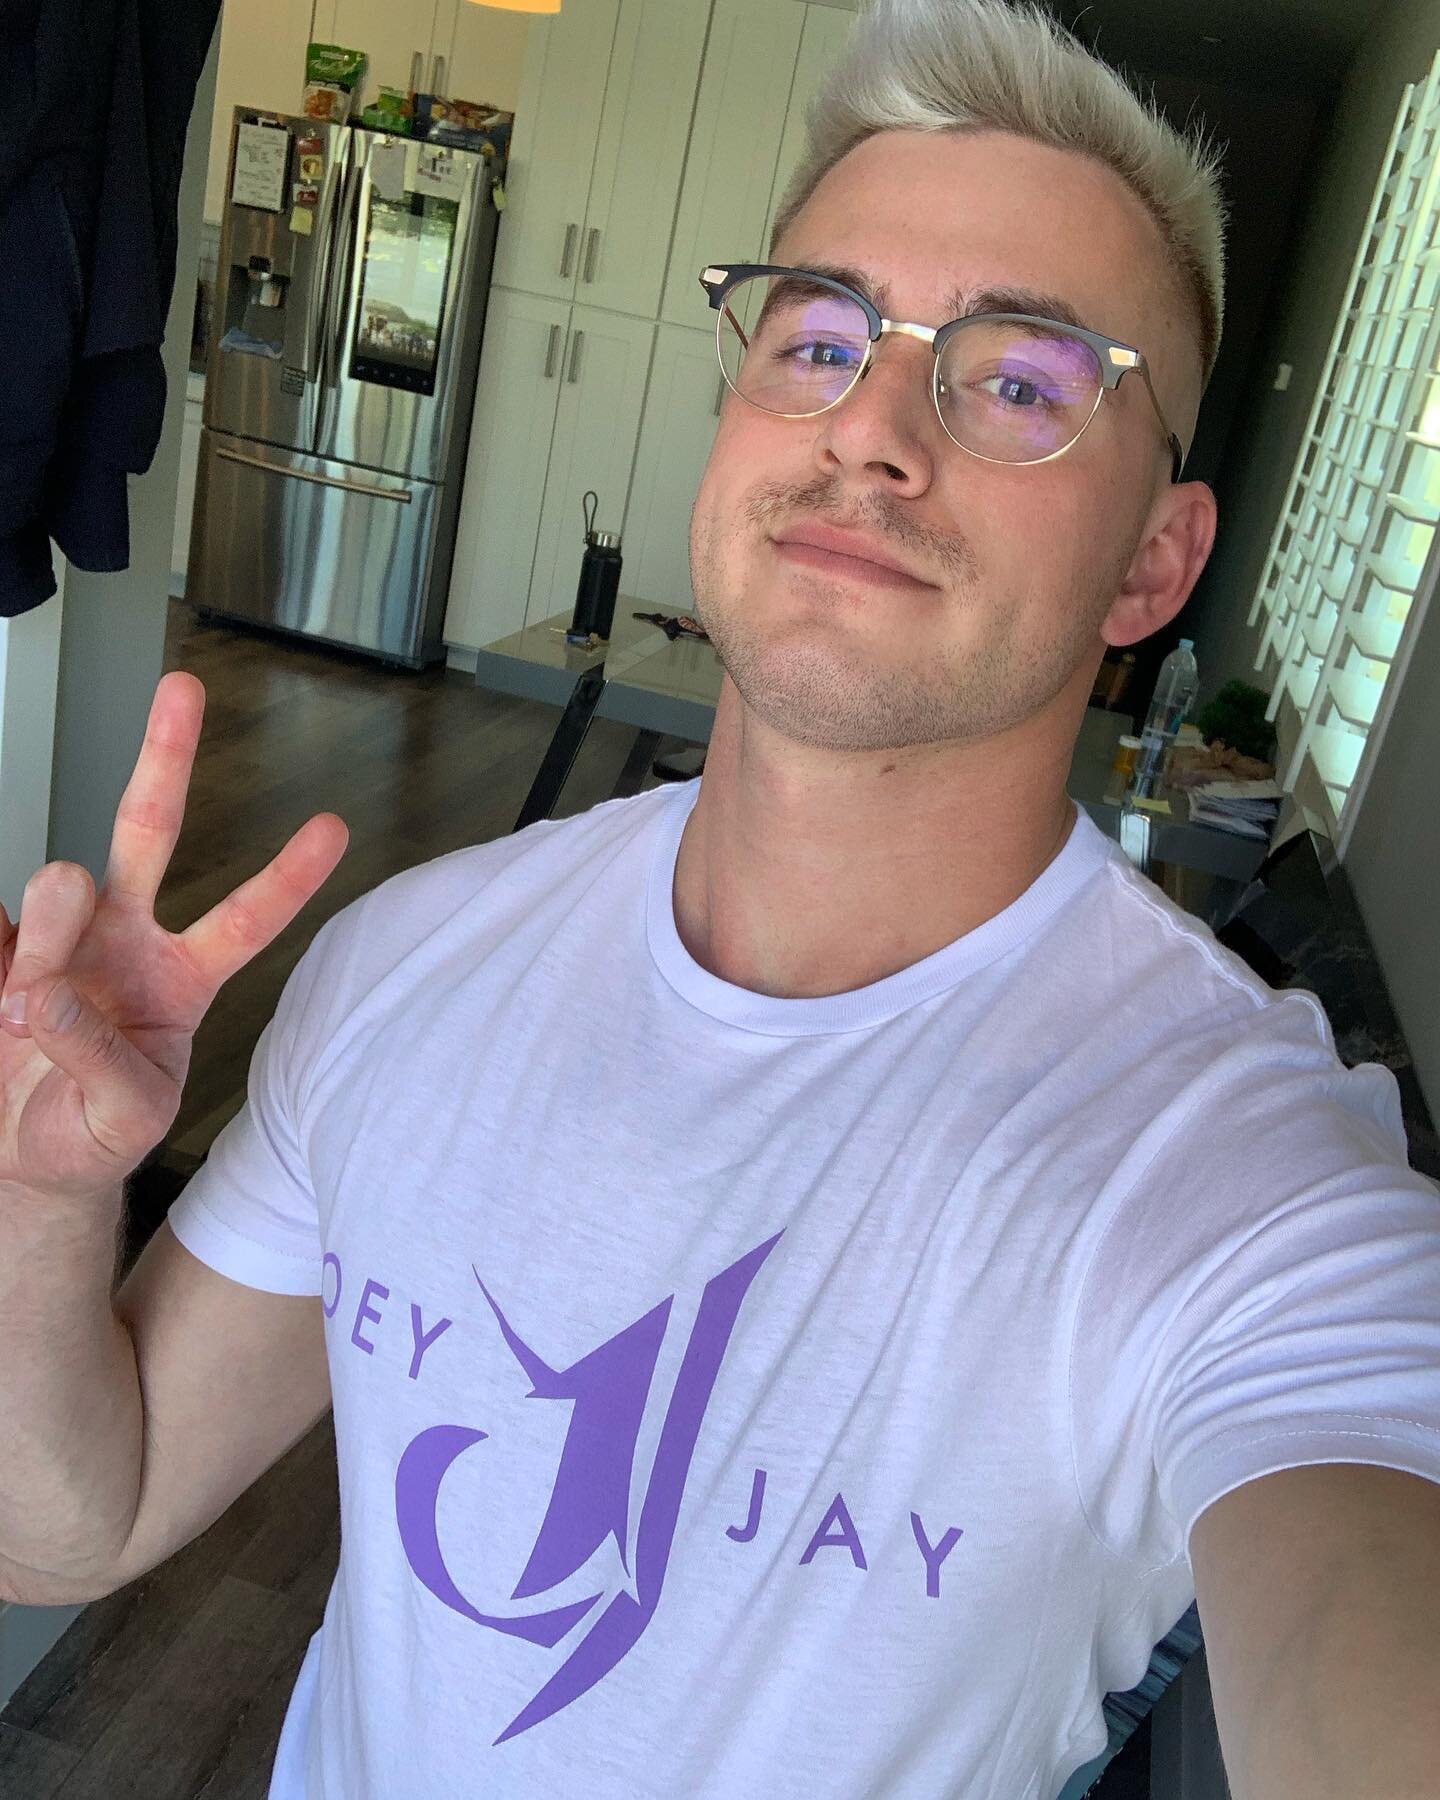 OMG ROUND 2 MERCH DEAL: Between now and Wednesday 3/10, anyone who spends $50 or more not including shipping will be put into a drawing to have a one-on-one virtual meet and greet with this gay ass BITCHHH BAYBEEE!!! THREE WINNERS!!!

😈LINK IN BIO😈